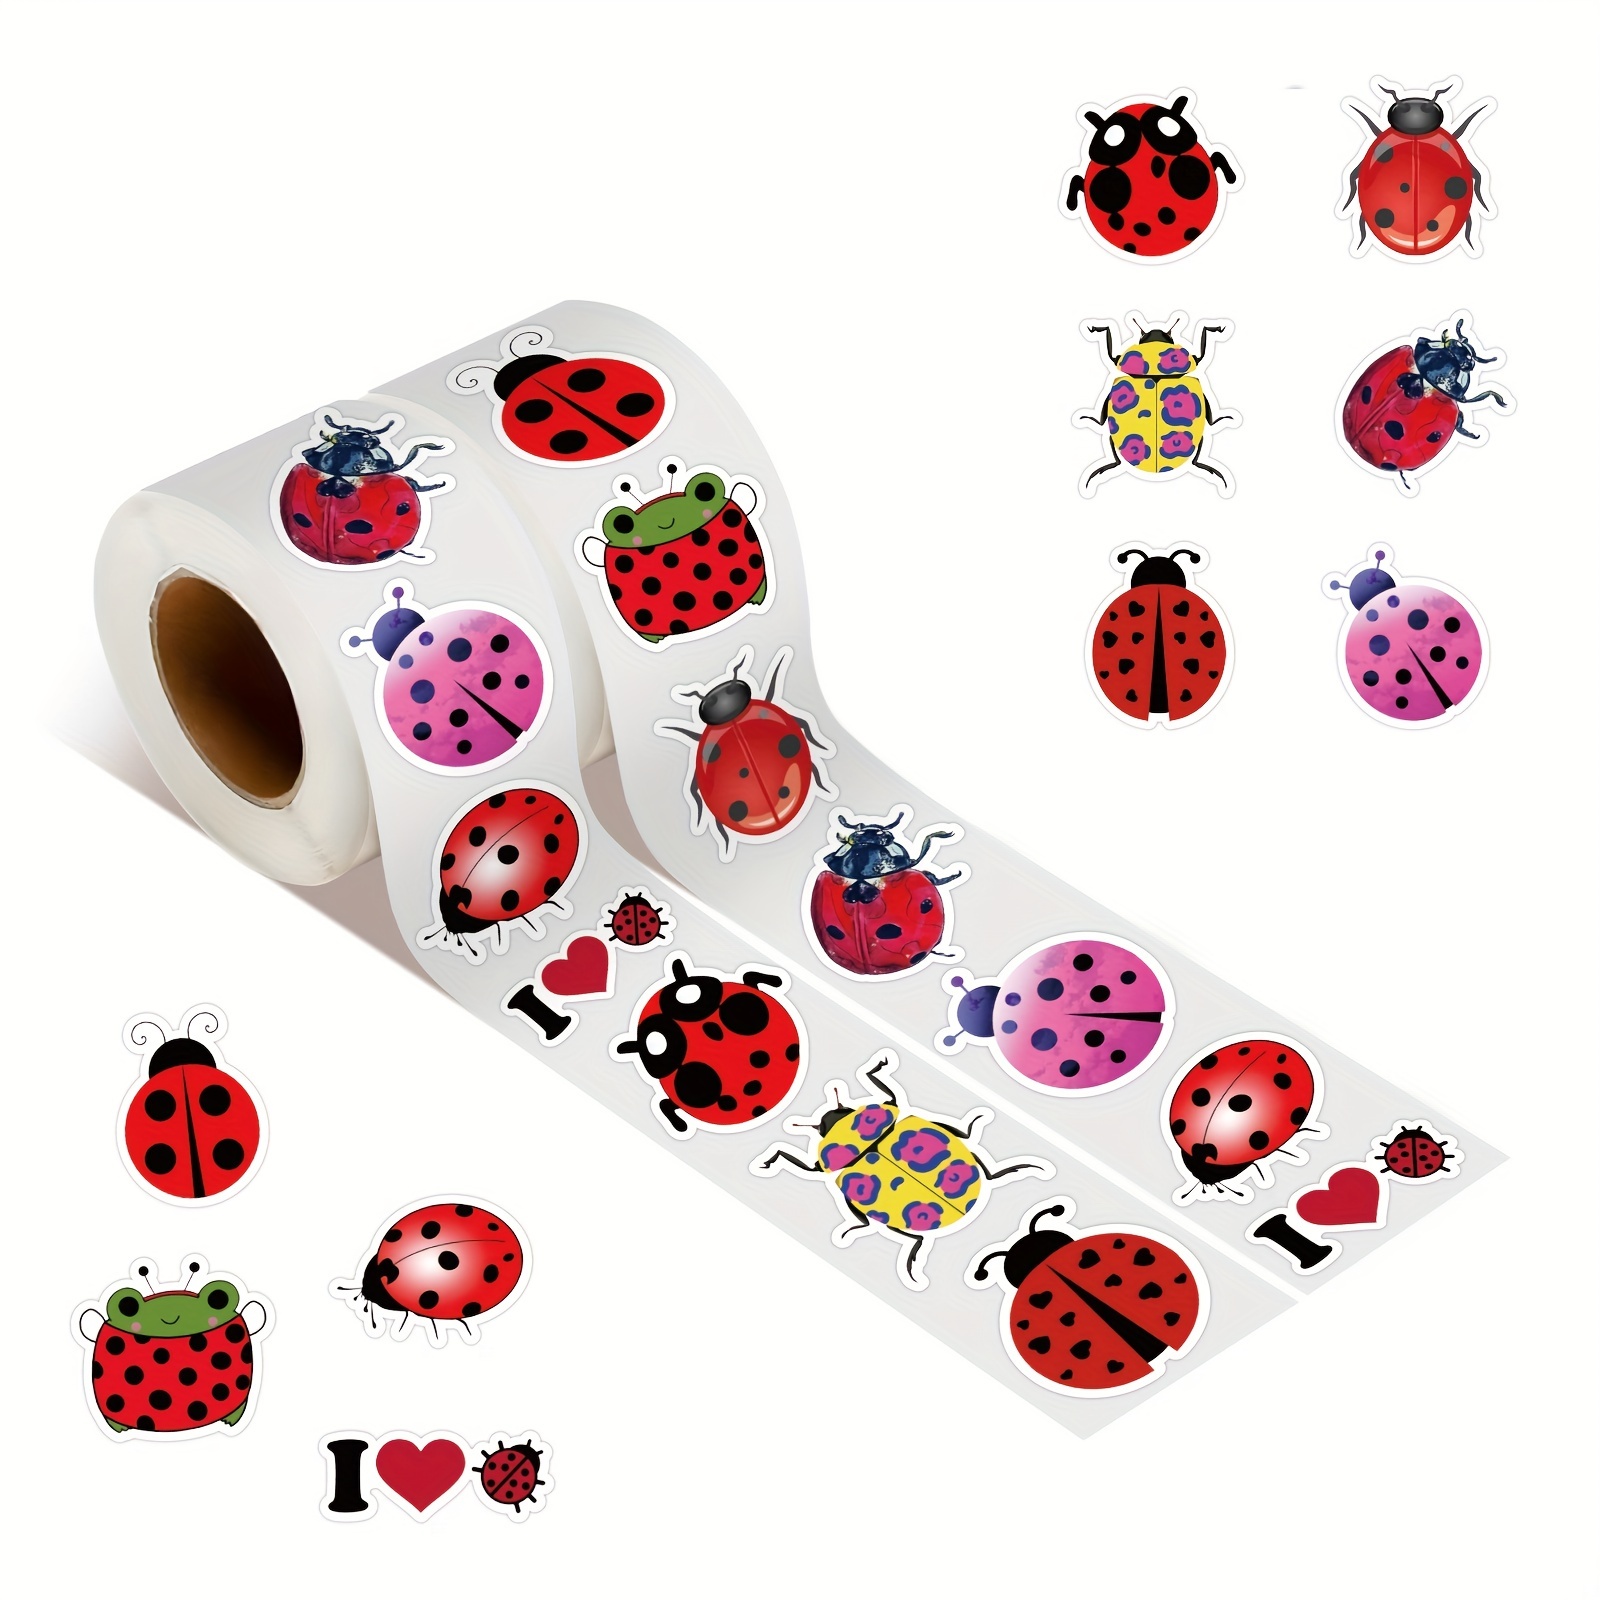 

500pcs Ladybird Stickers Roll | Waterproof Vinyl Decals For Bike Water Bottles Laptop Bicycle Refrigerator Cup Luggage Computer Mobile Phone Skateboard Décor